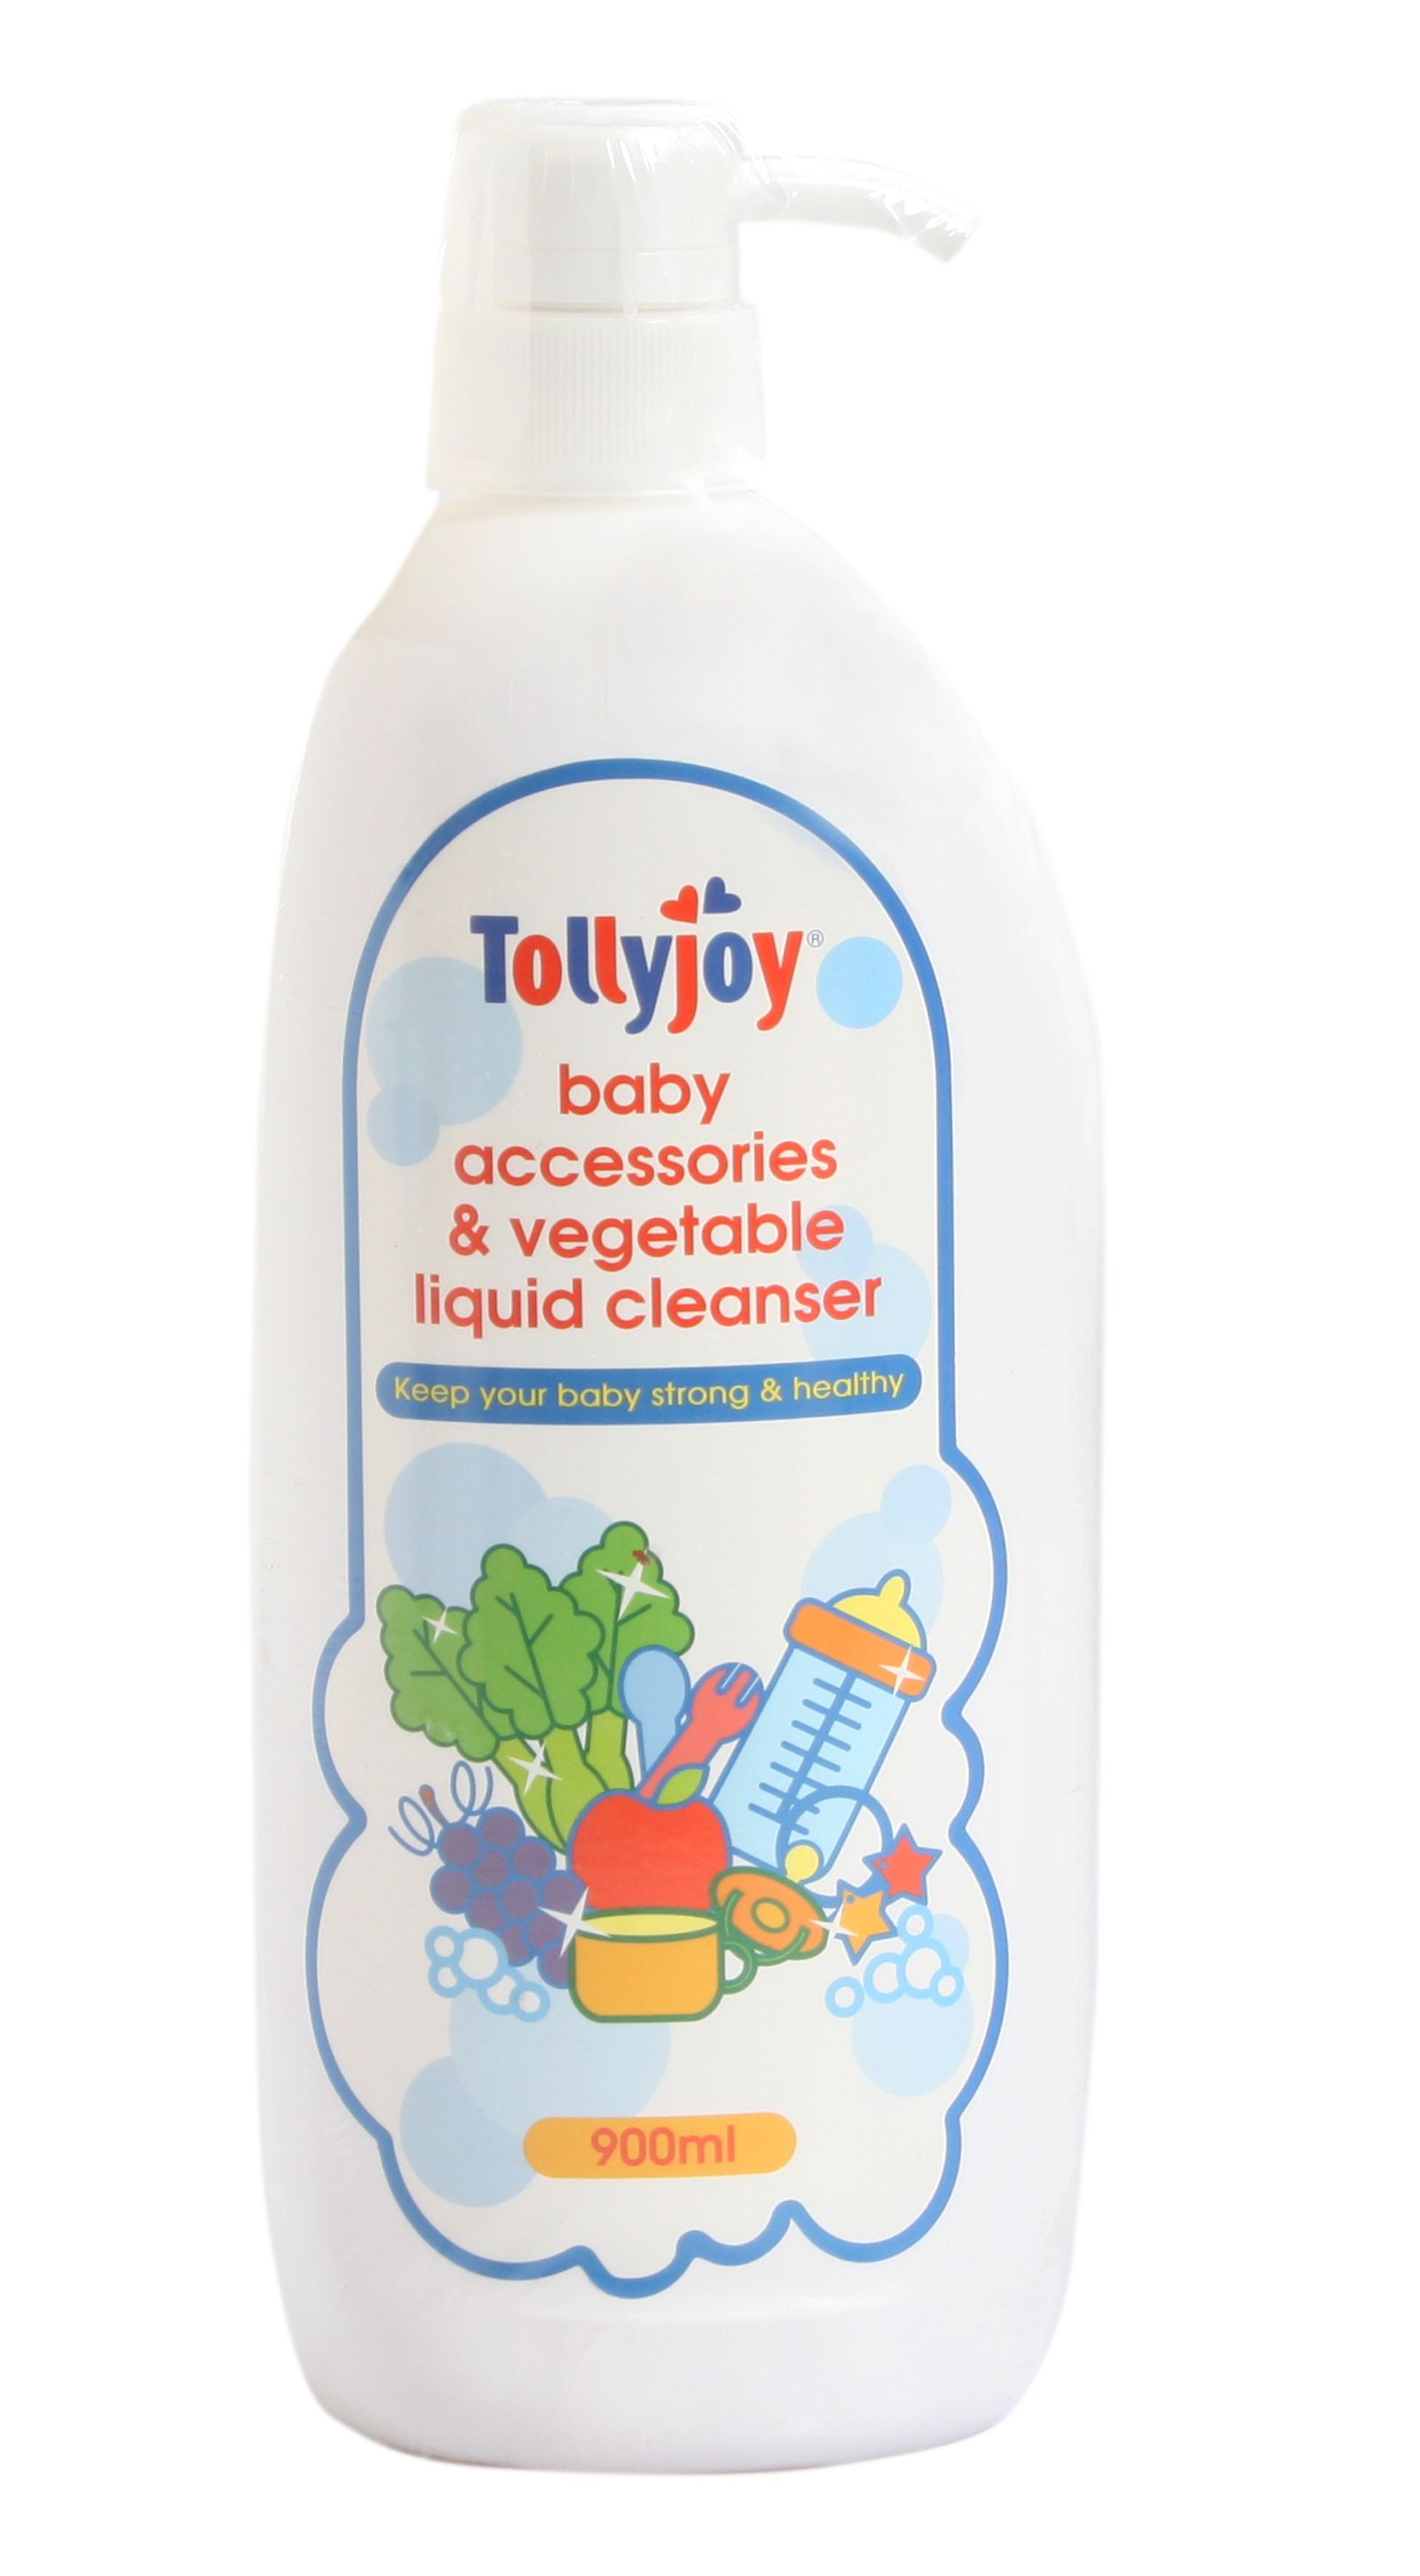 Tollyjoy Baby Accessories & Vegetable Liquid Cleanser